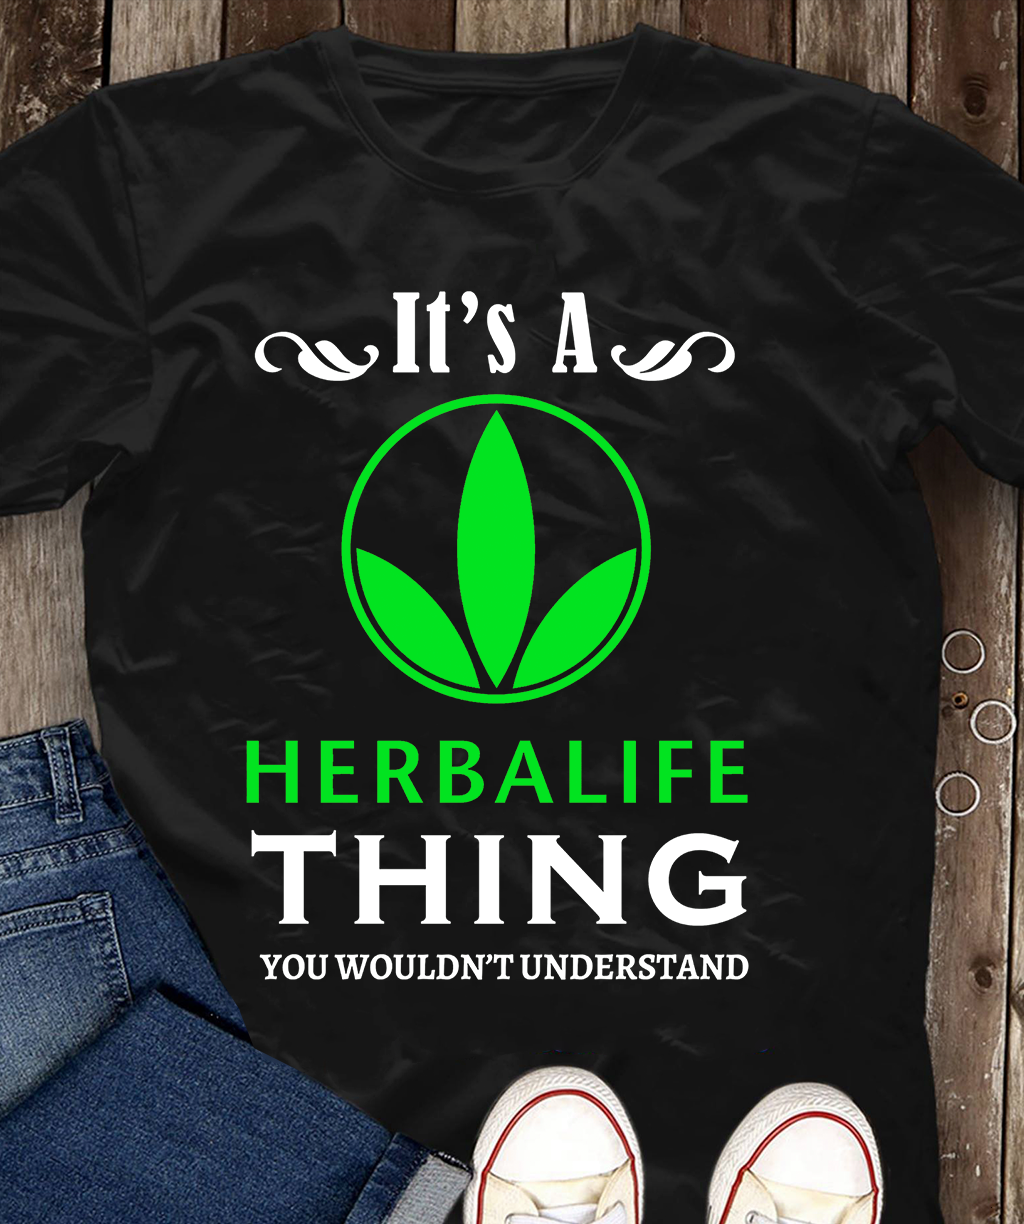 Its a herbalife thing. you wouldnt understand